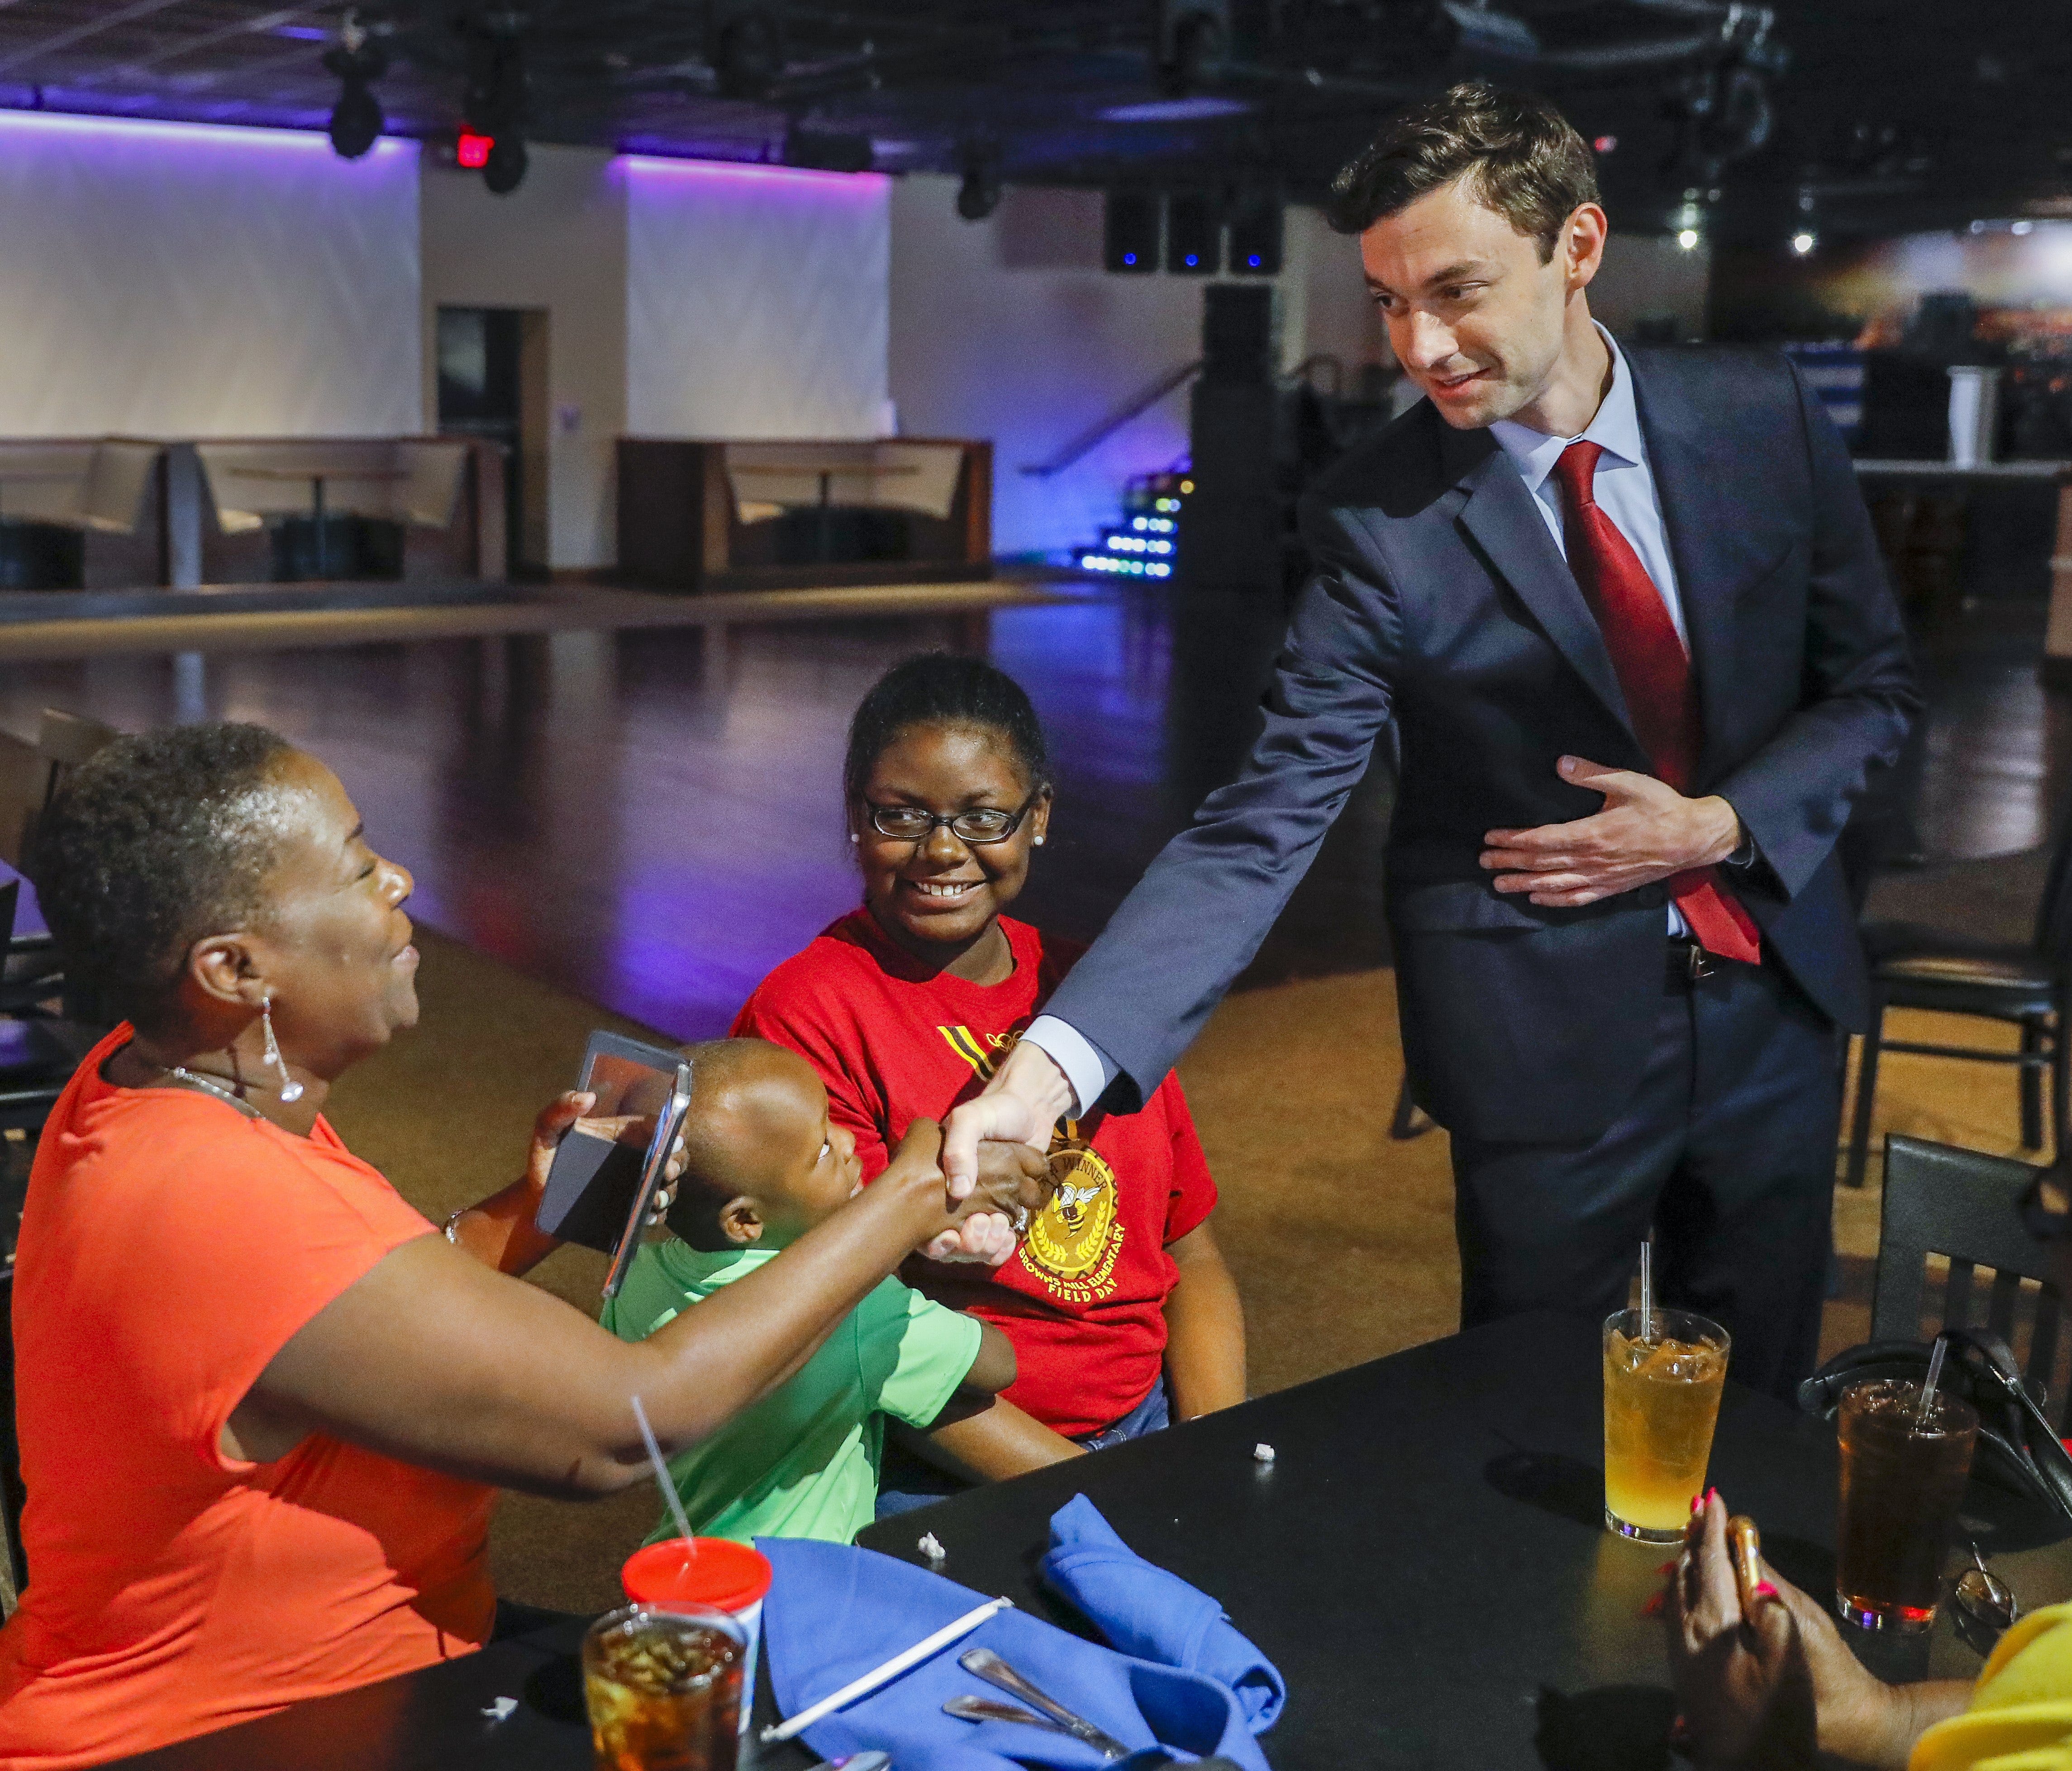 Democratic congressional candidate Jon Ossoff campaigns at a restaurant in Tucker, Ga. Ossoff faces Republican candidate Karen Handel in a closely watched special election Tuesday.